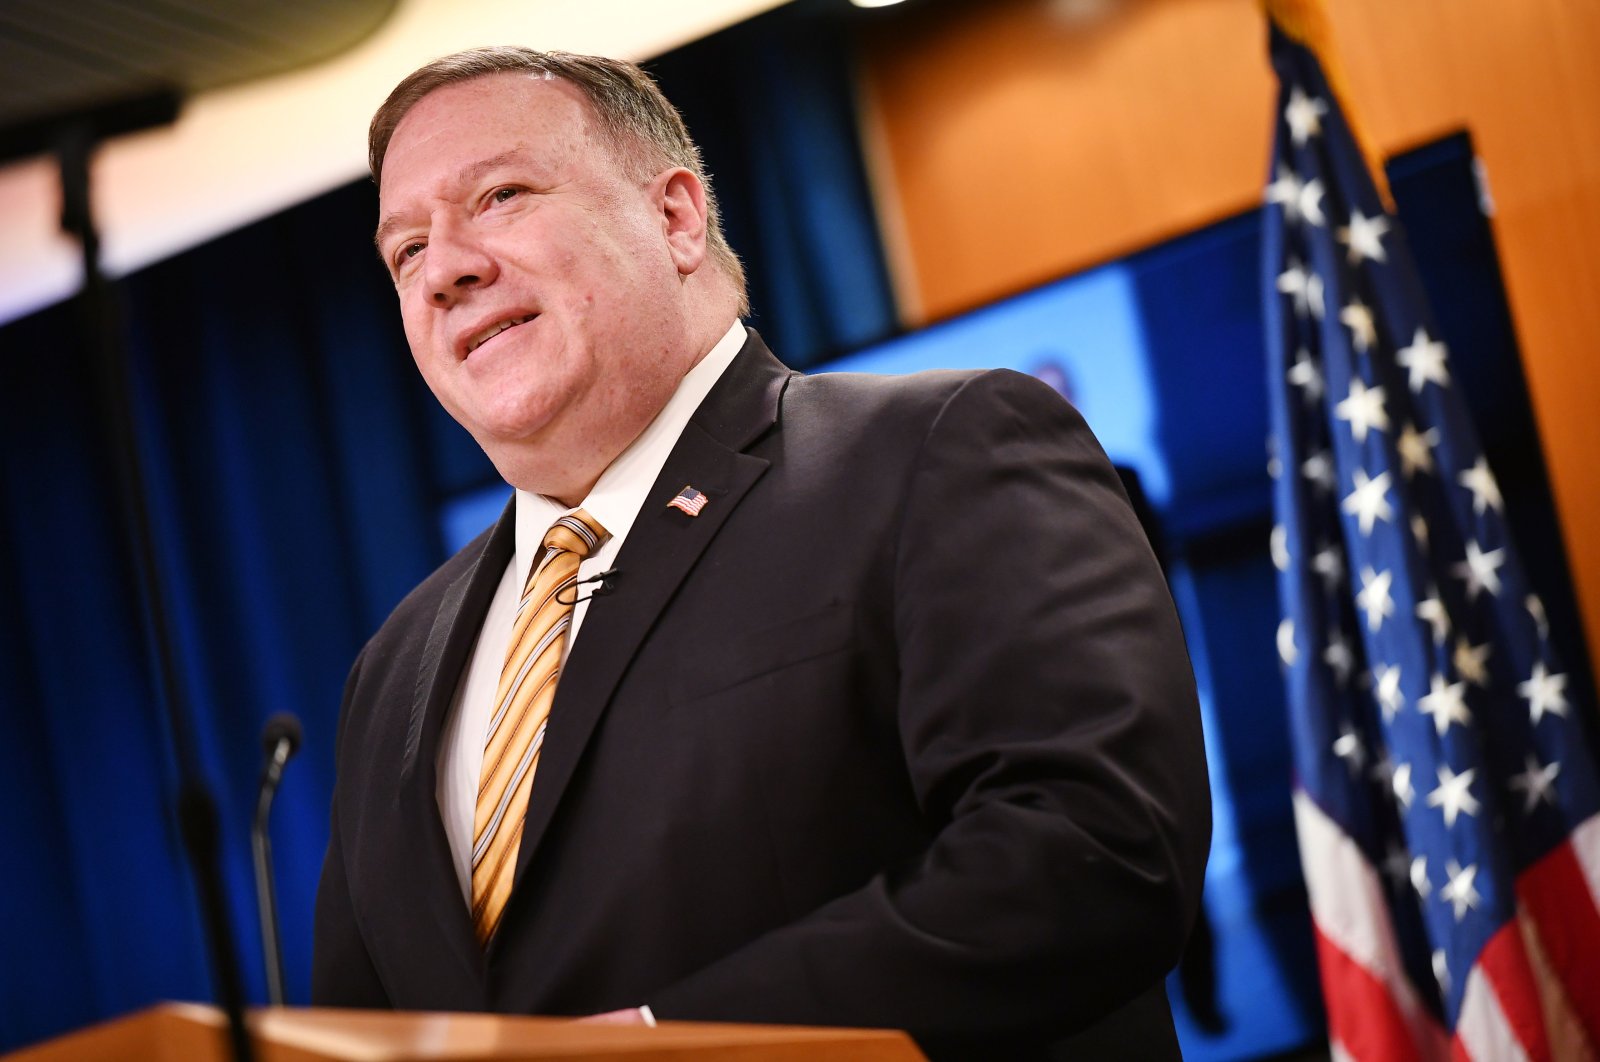 US Secretary of State Mike Pompeo speaks during a press conference at the State Department in Washington, DC on June 24, 2020. (AFP Photo)